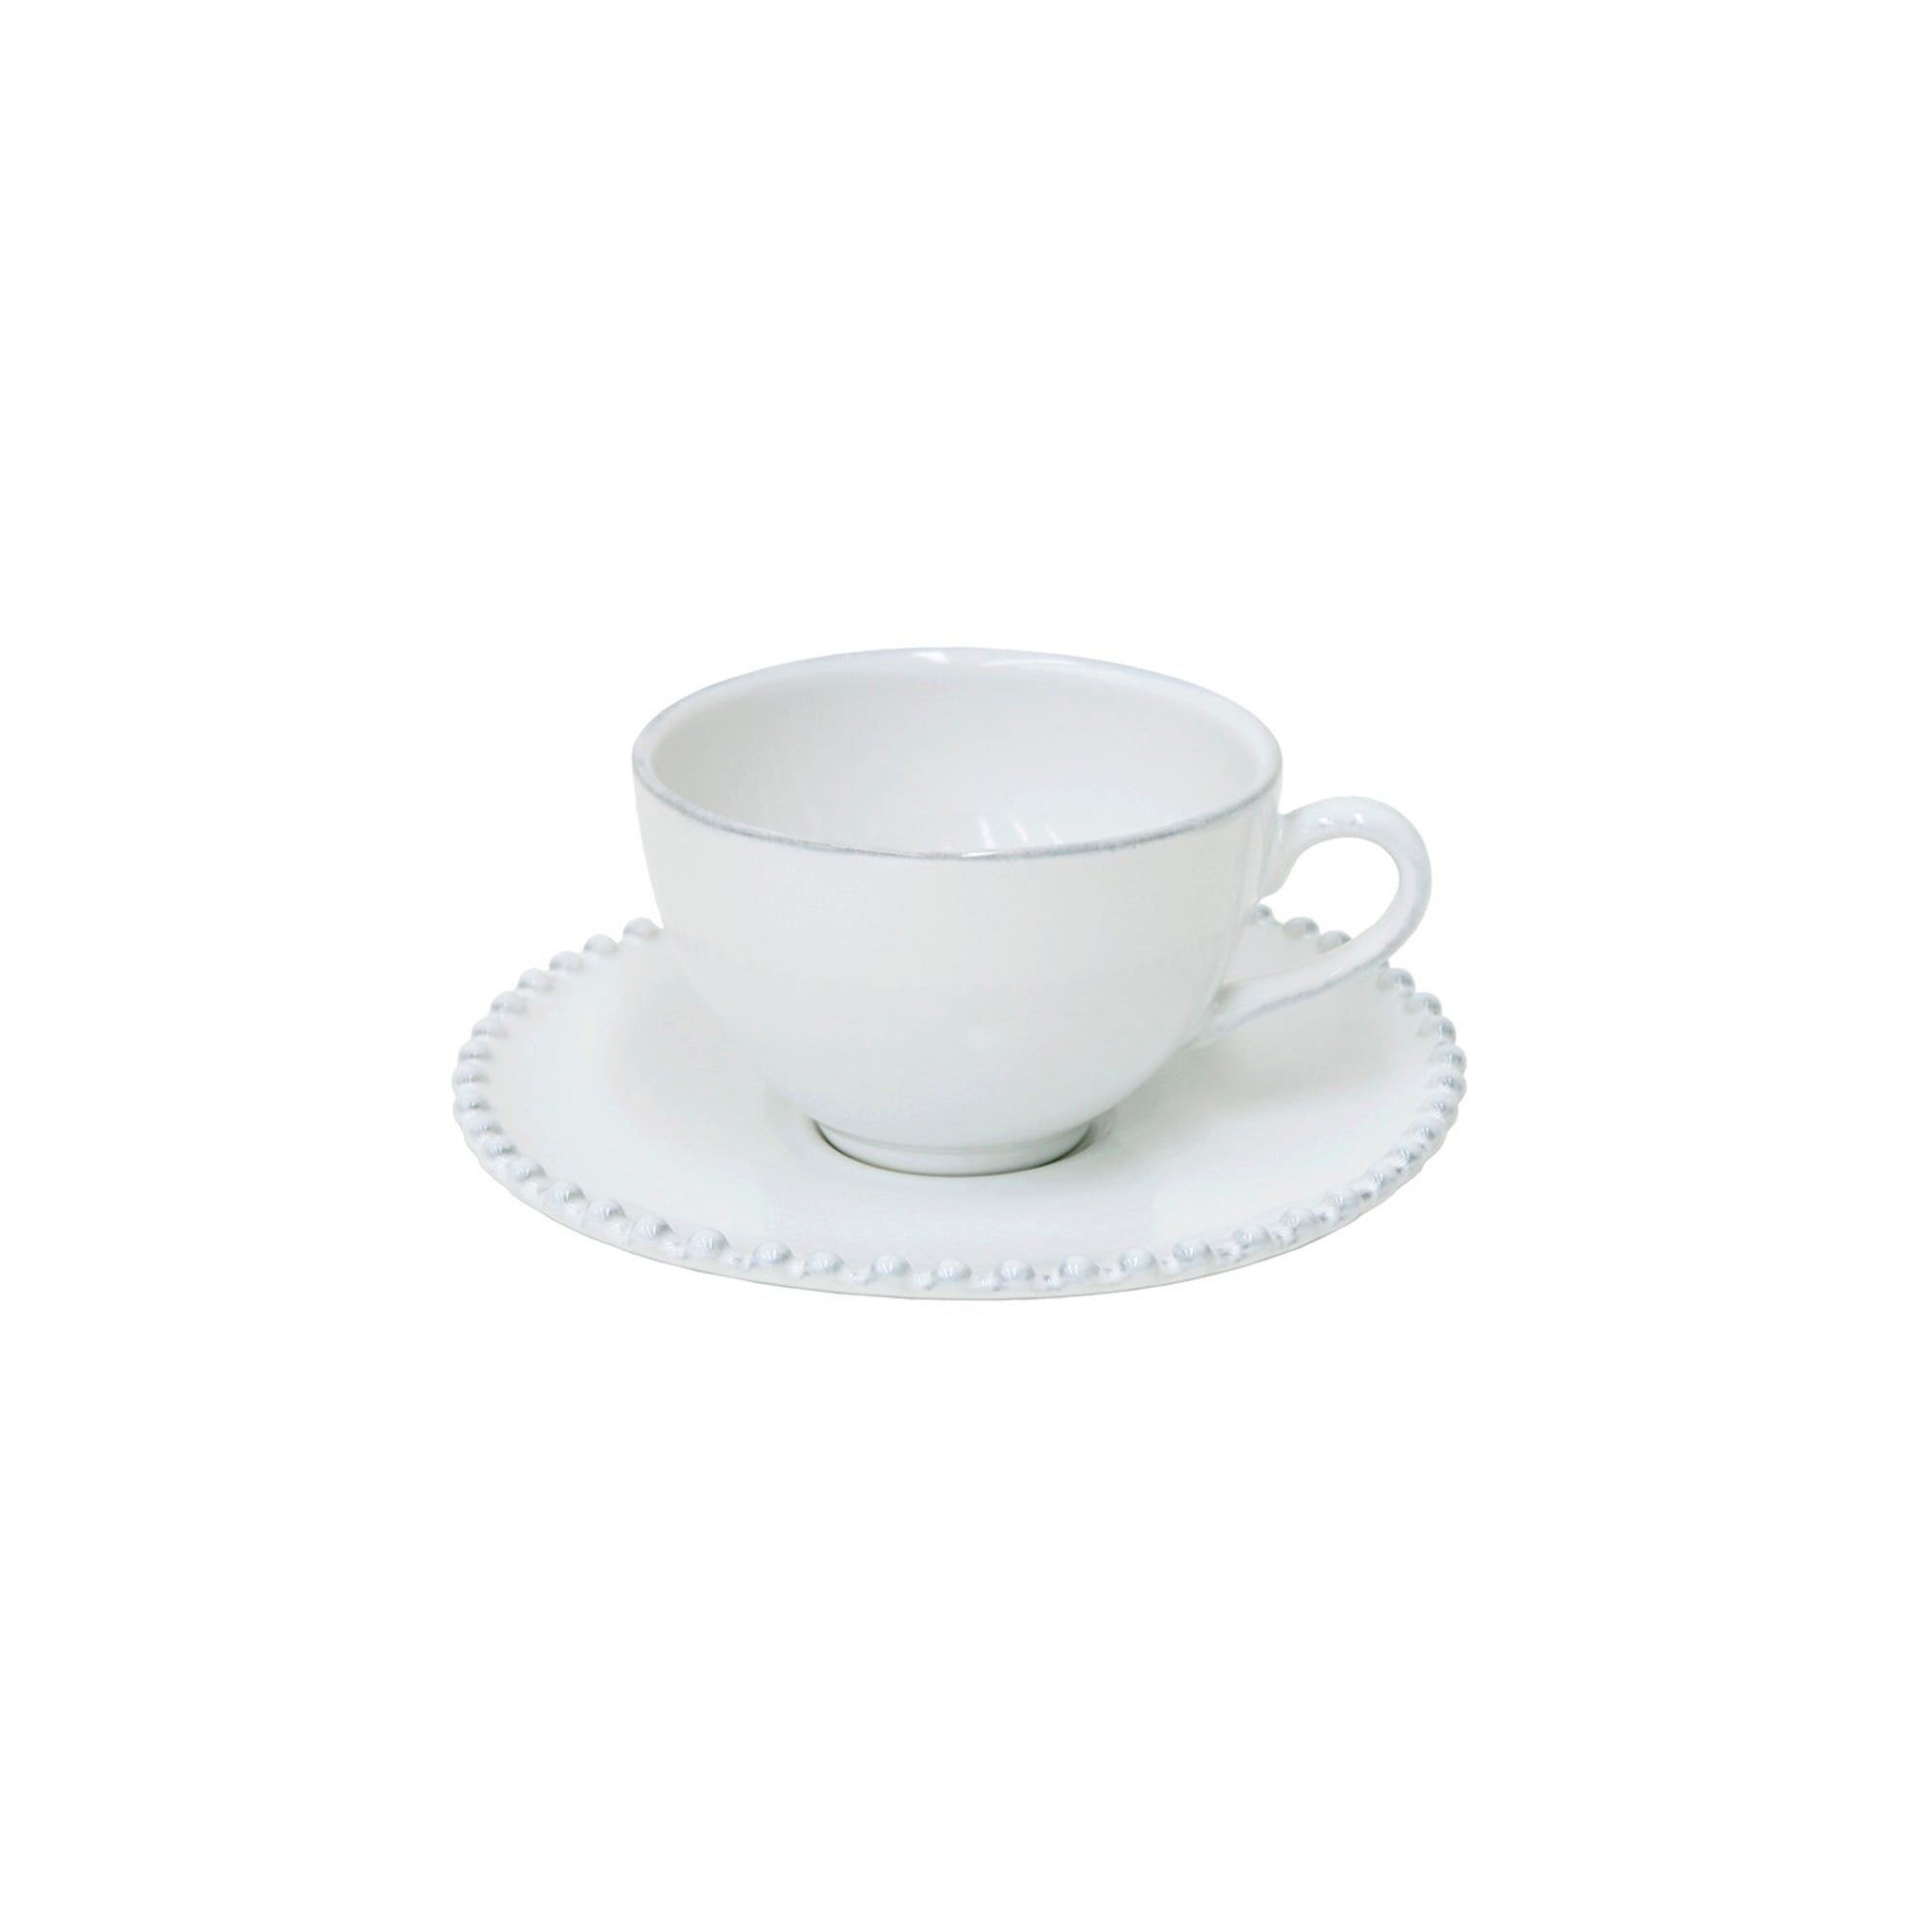 Pearl Tea Cup and Saucer 8 oz. White